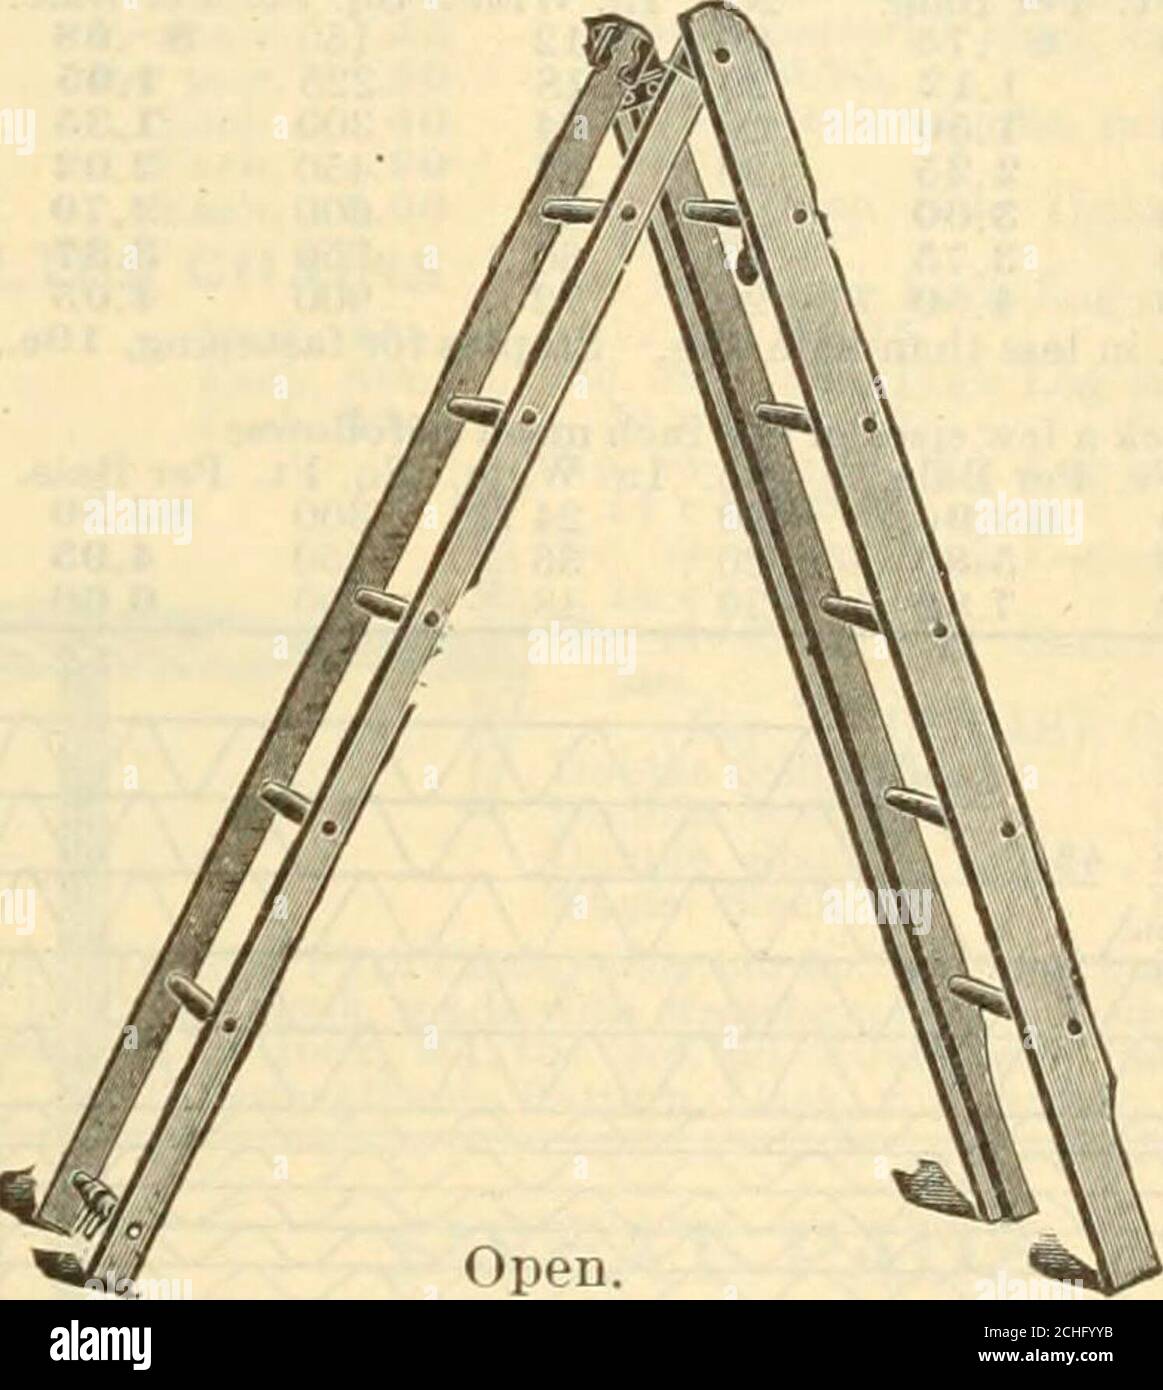 . Griffith & Turner Co : farm and garden supplies . as does the other style. We use Norway pine for sides; rock elm, or second-growthwhite hickory for rungs; the very best grade of malleable ironcastings for metal parts. PRICE LIST. 12-foot extension ladder makes 6-foot step ladder $2.16 14 7 2.52 16 8 2.88 18 9 3.24 20 10 3.GO 22 11 3.96 24 12 4.32 26 in two sections of 12 and 14 ft. each, 5.20 28 12 16 5.60 30 * 14 16 6.0O 32 14 18 6.40 34 16 18 6.80 36 16 20 T.20 38 18 20 7.60 40 18 22 8.0O In ordering, bear in mind that a certainamount has to be allowed for the lap whenthe ladder is in its Stock Photo